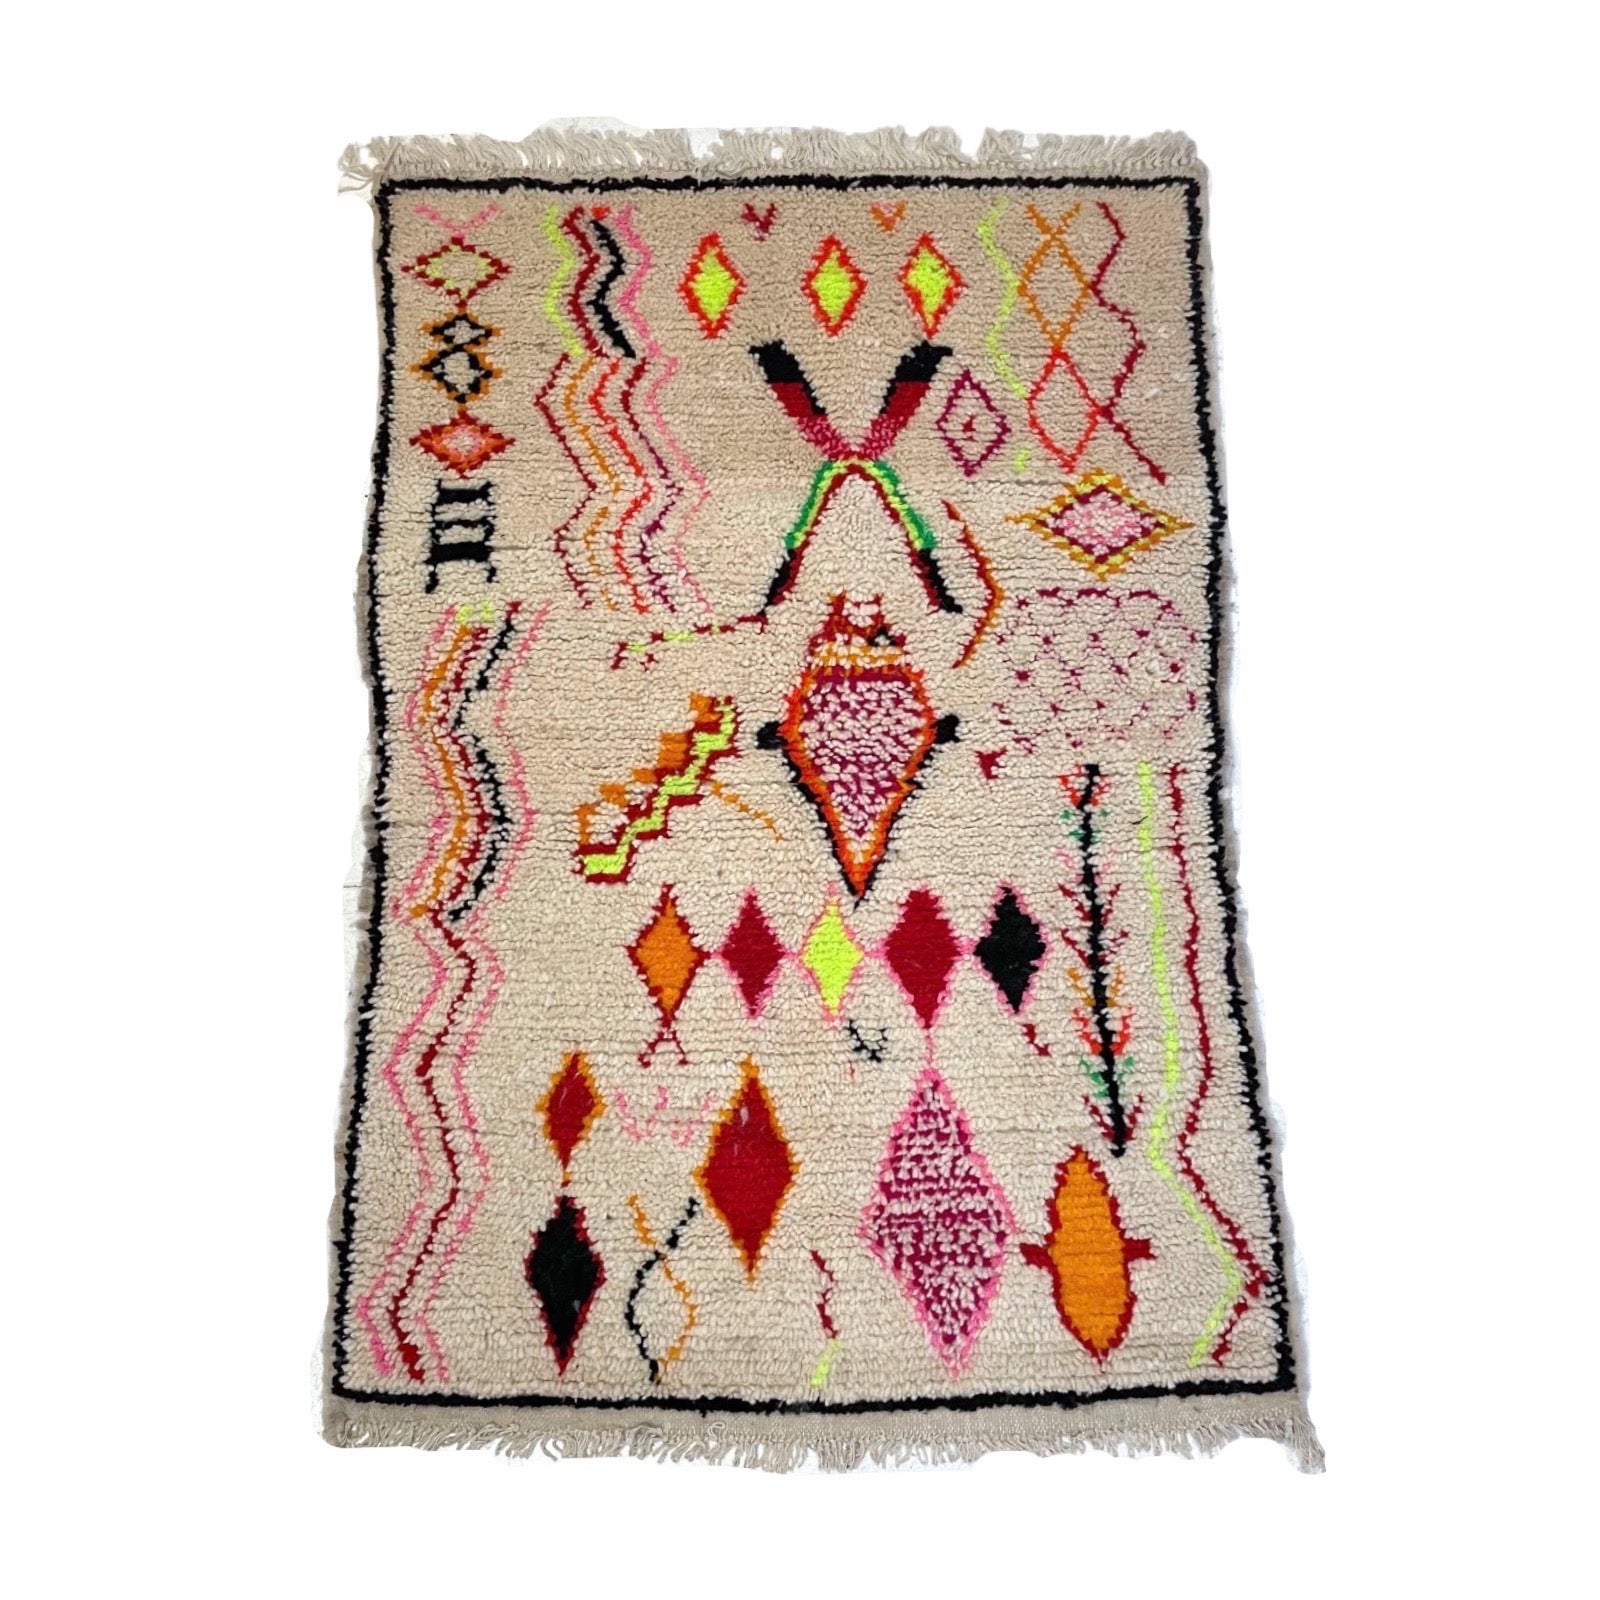 White Azilal style Moroccan rug with colorful details - Kantara | Moroccan Rugs